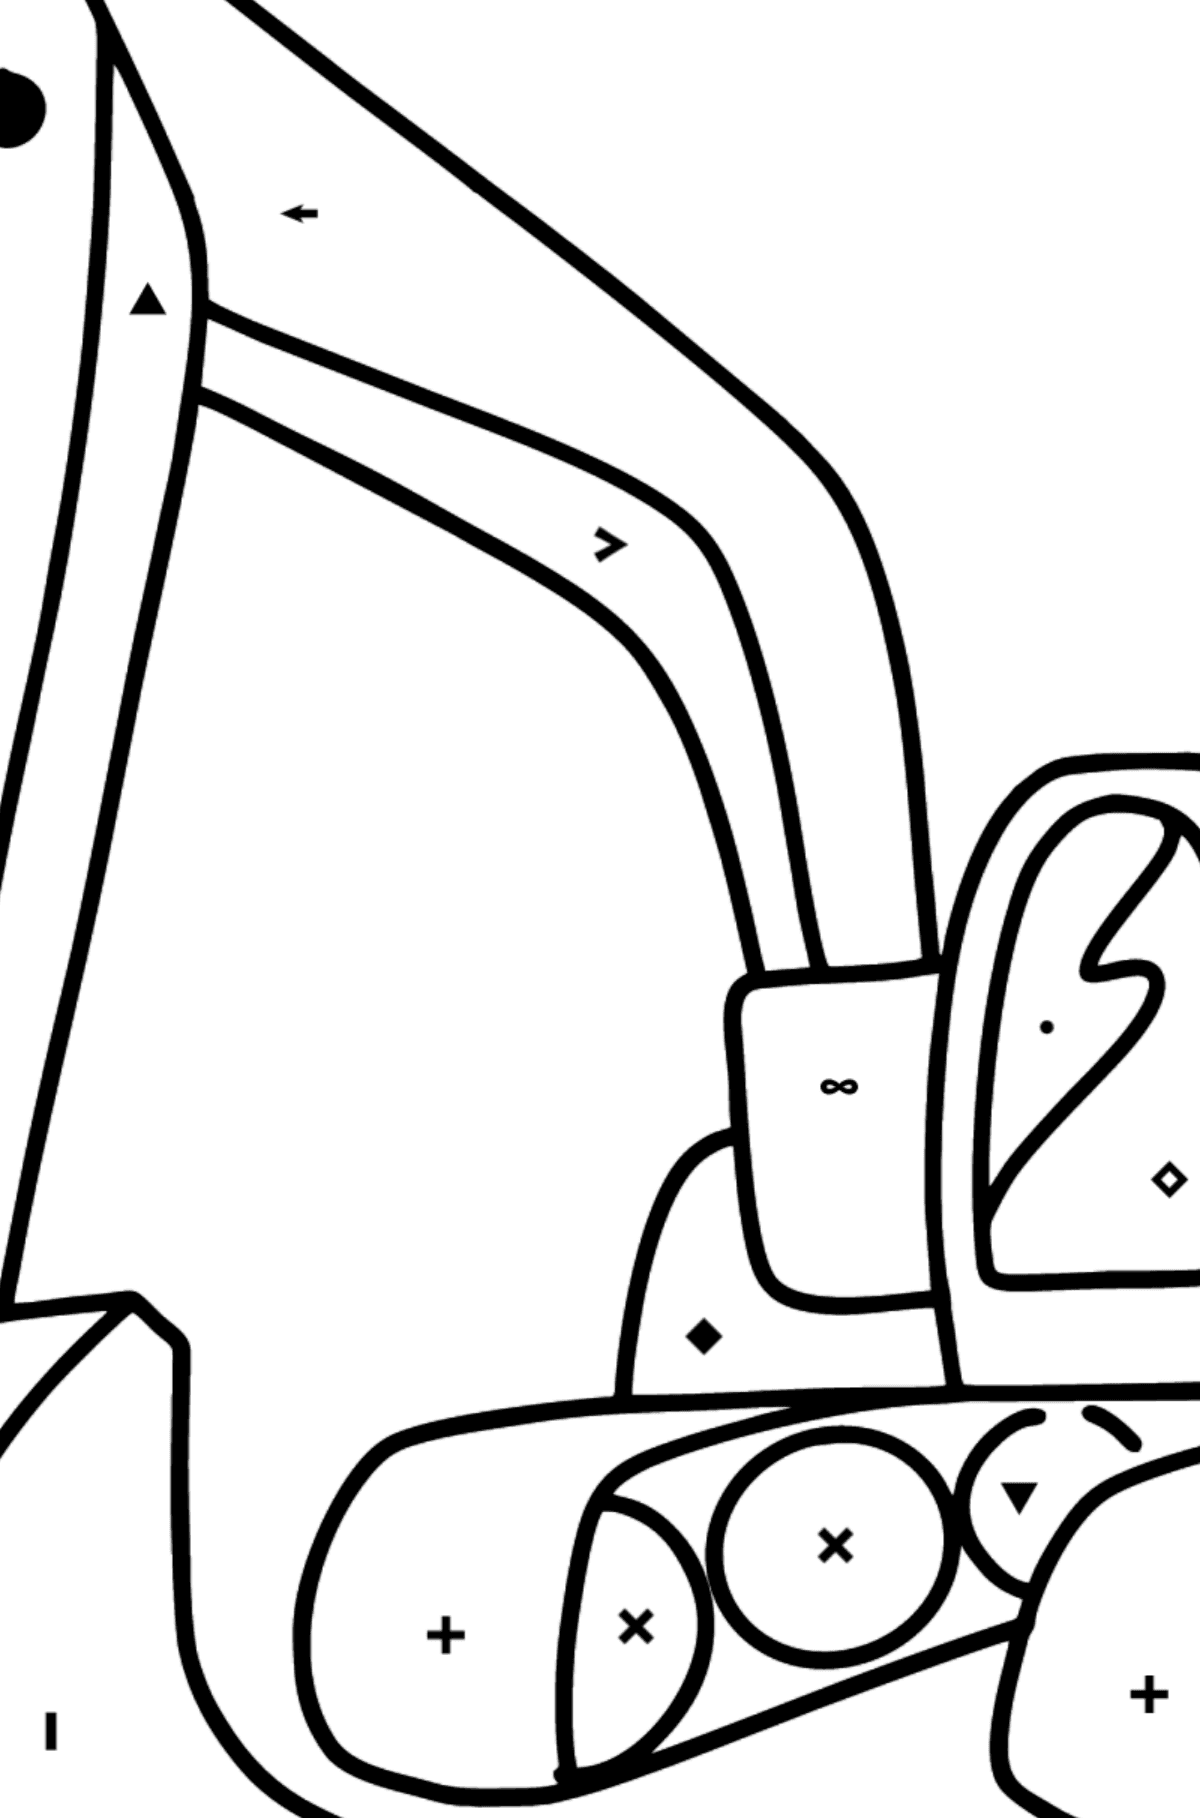 Tractor Excavator coloring page - Coloring by Symbols for Kids